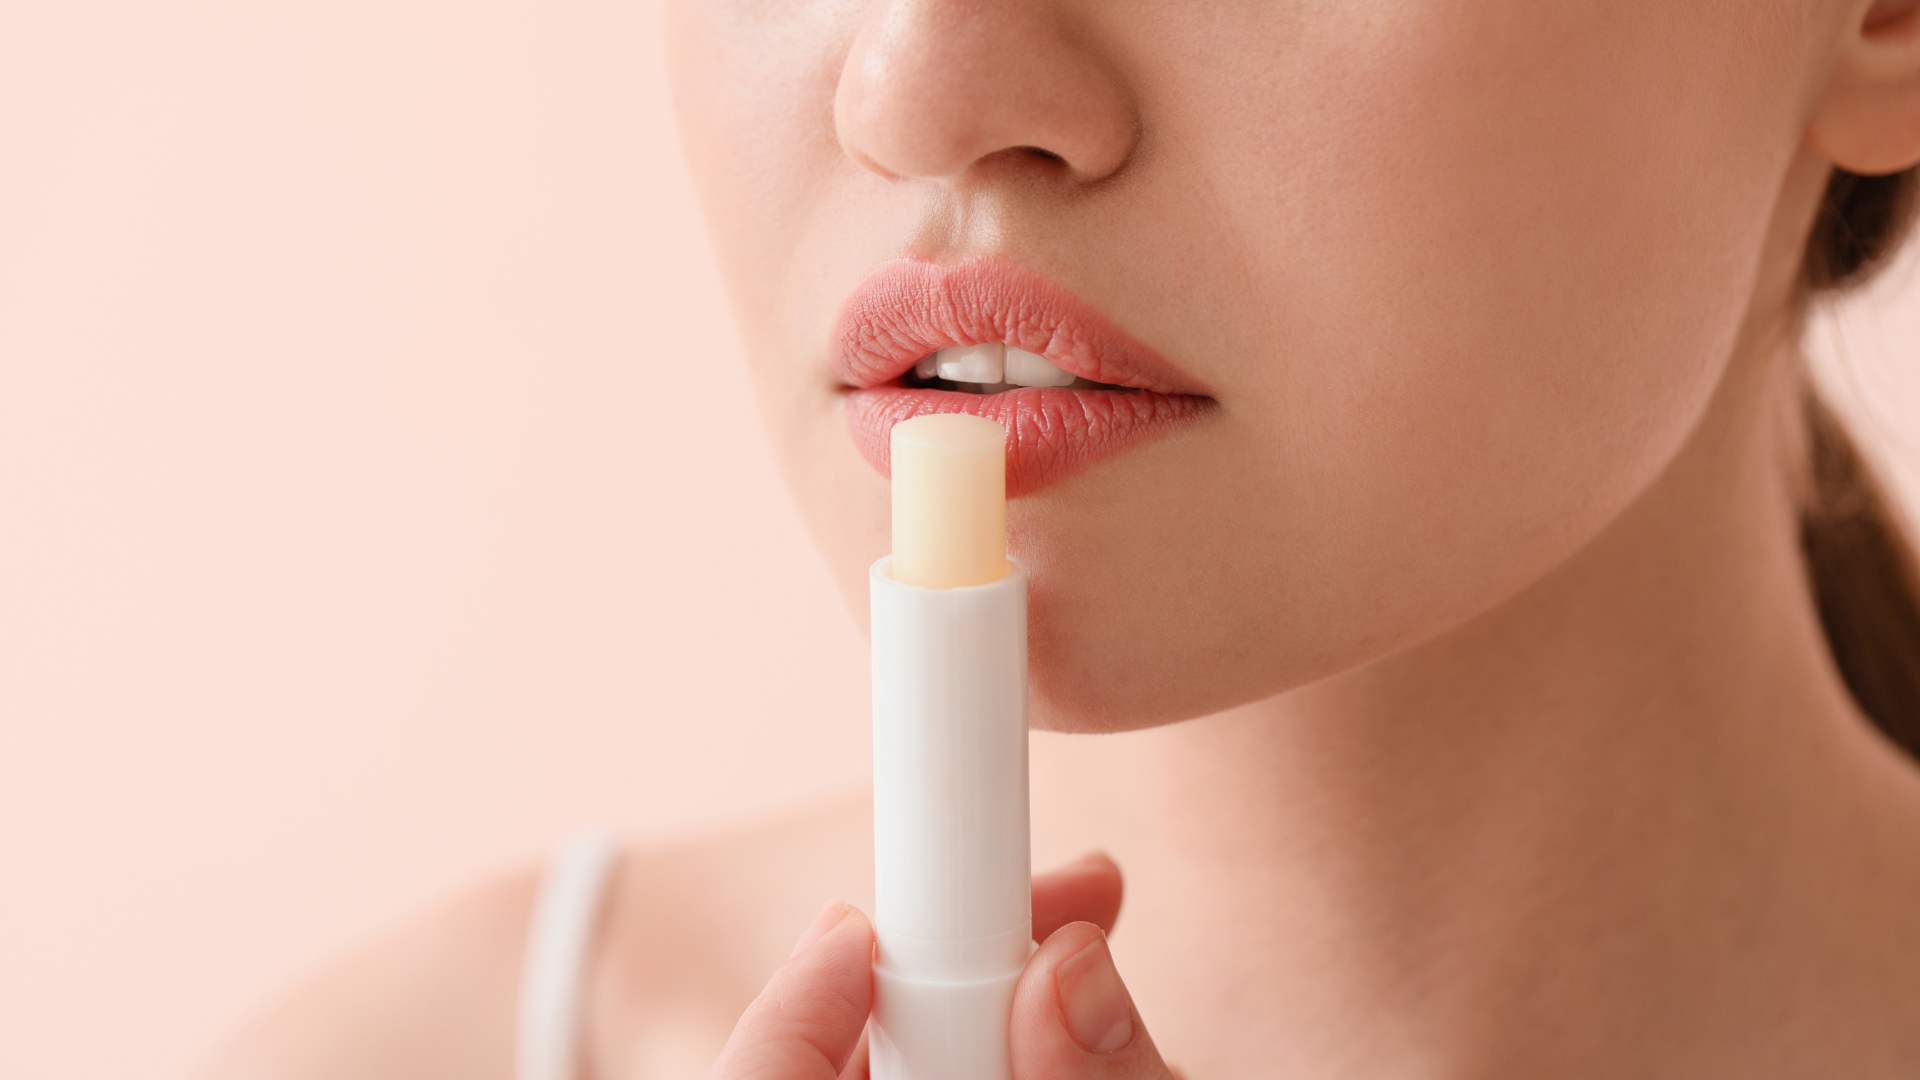 Redhead Skin: Can Lip Balm Make Your Chapped Lips Worse?